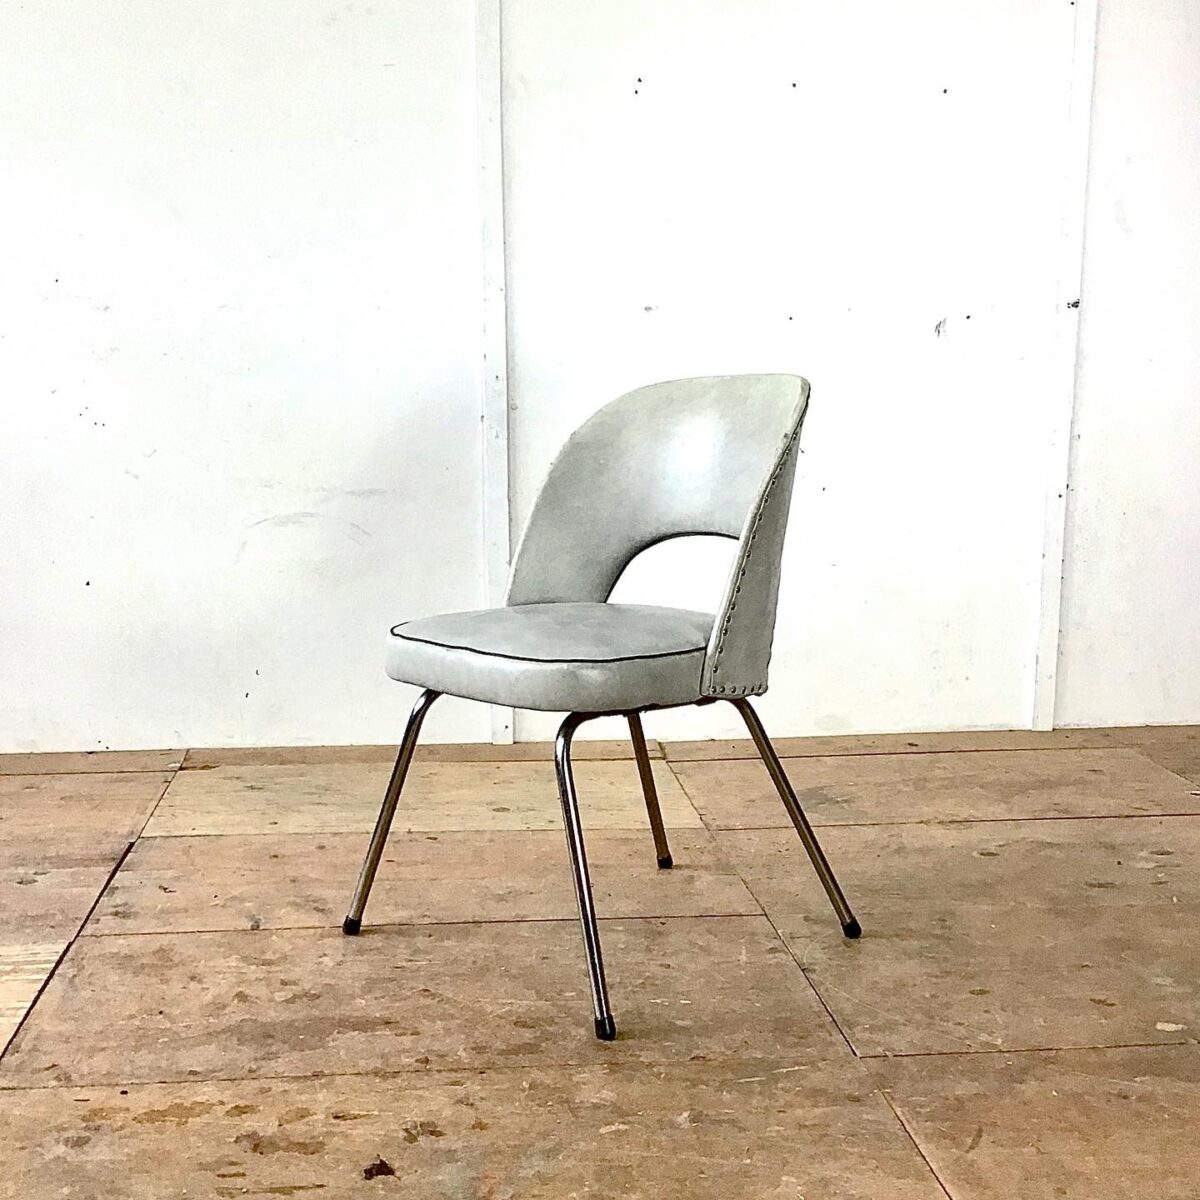 Easy chairs